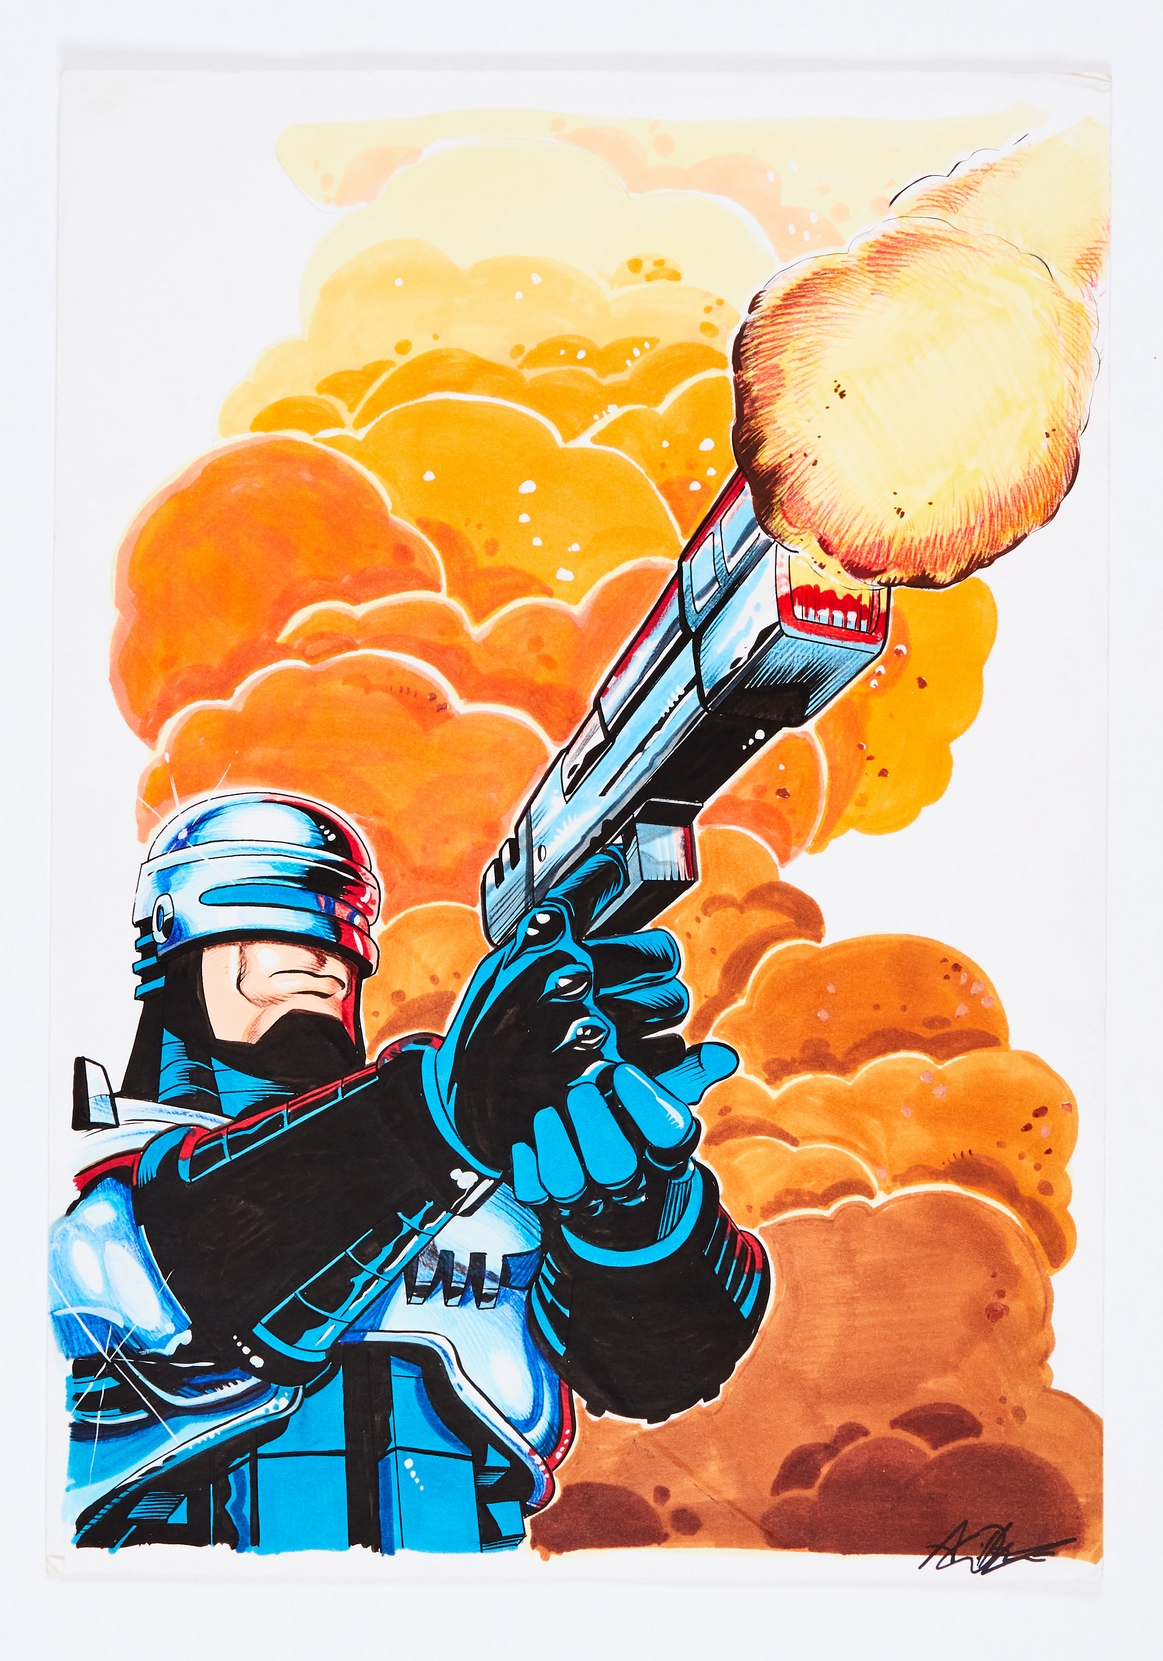 Robocop original artwork cover page painted and signed by Anthony Williams (early 1990s).